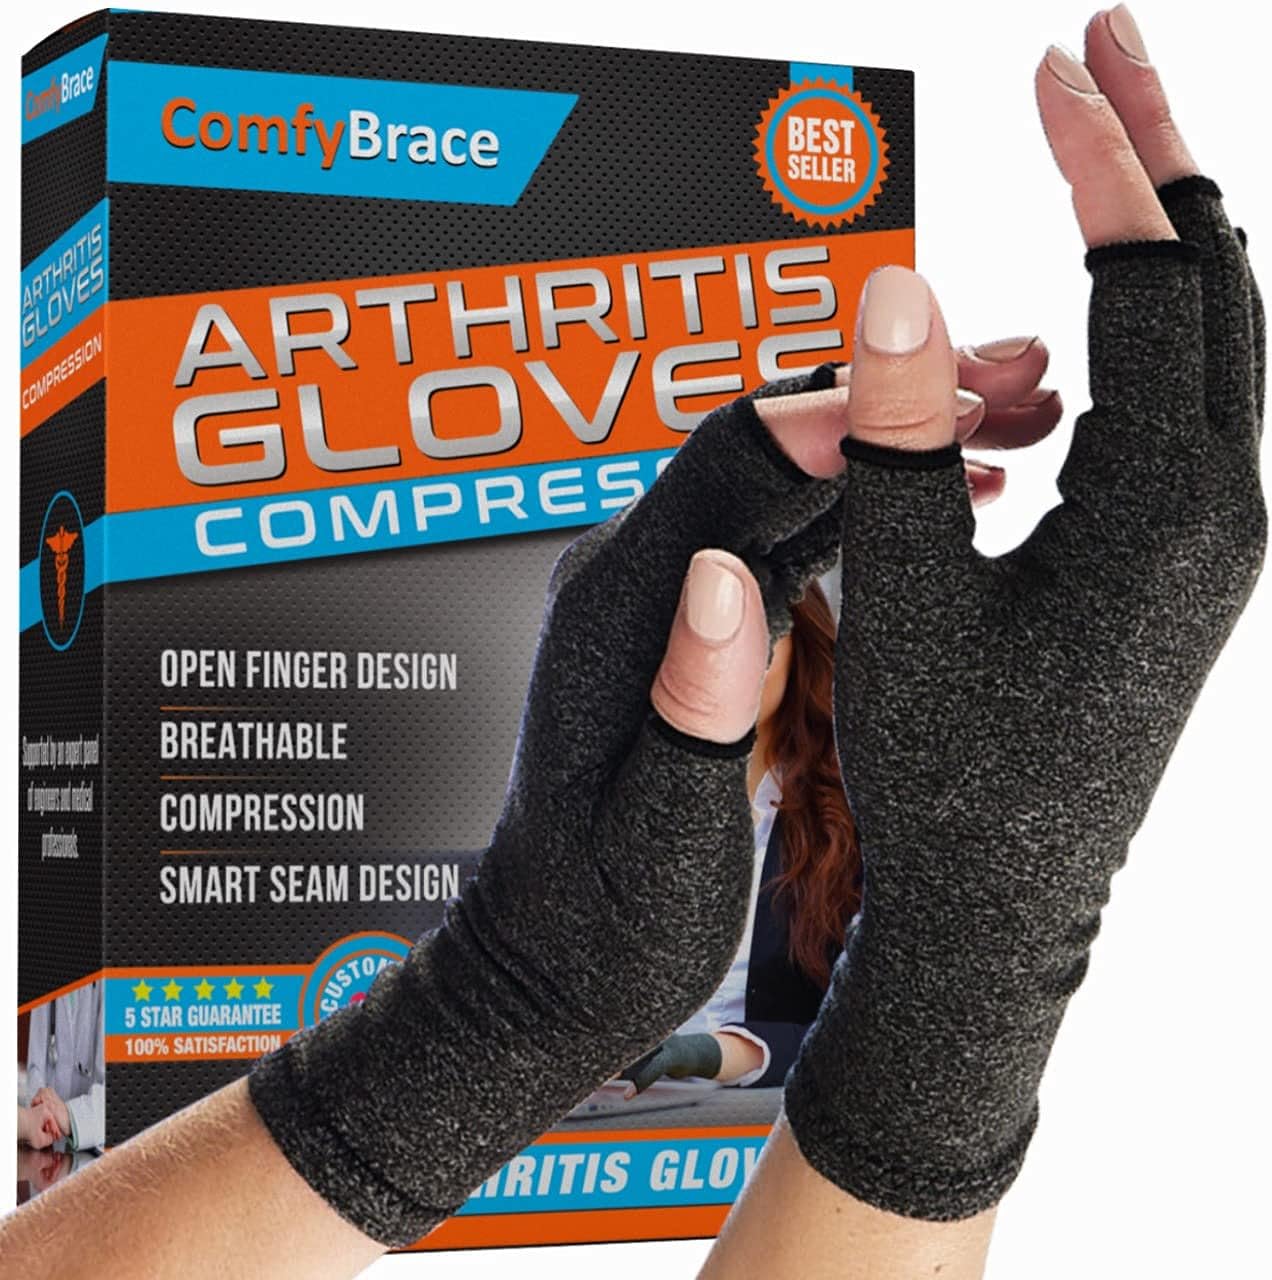 ComfyBrace Arthritis Hand Compression Gloves Comfy Fit, Fingerless Design, Breathable Moisture Wicking Fabric